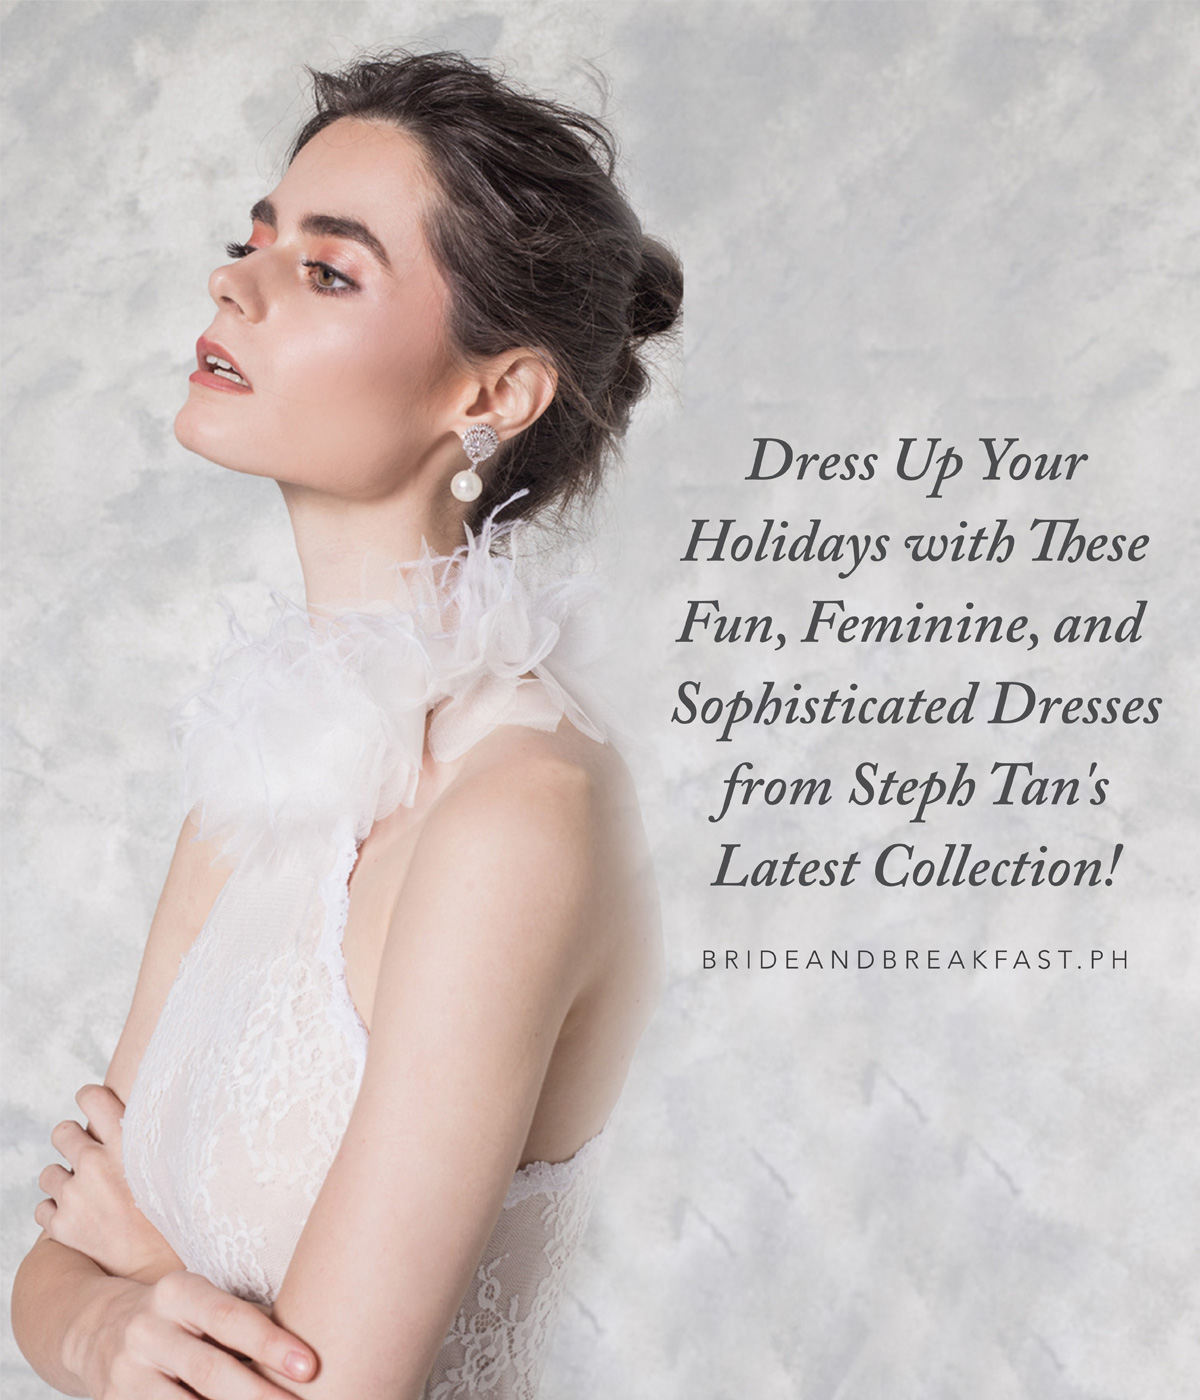 Dress Up Your Holidays with These Fun, Feminine, and Sophisticated Dresses from Steph Tan's Latest Collection!